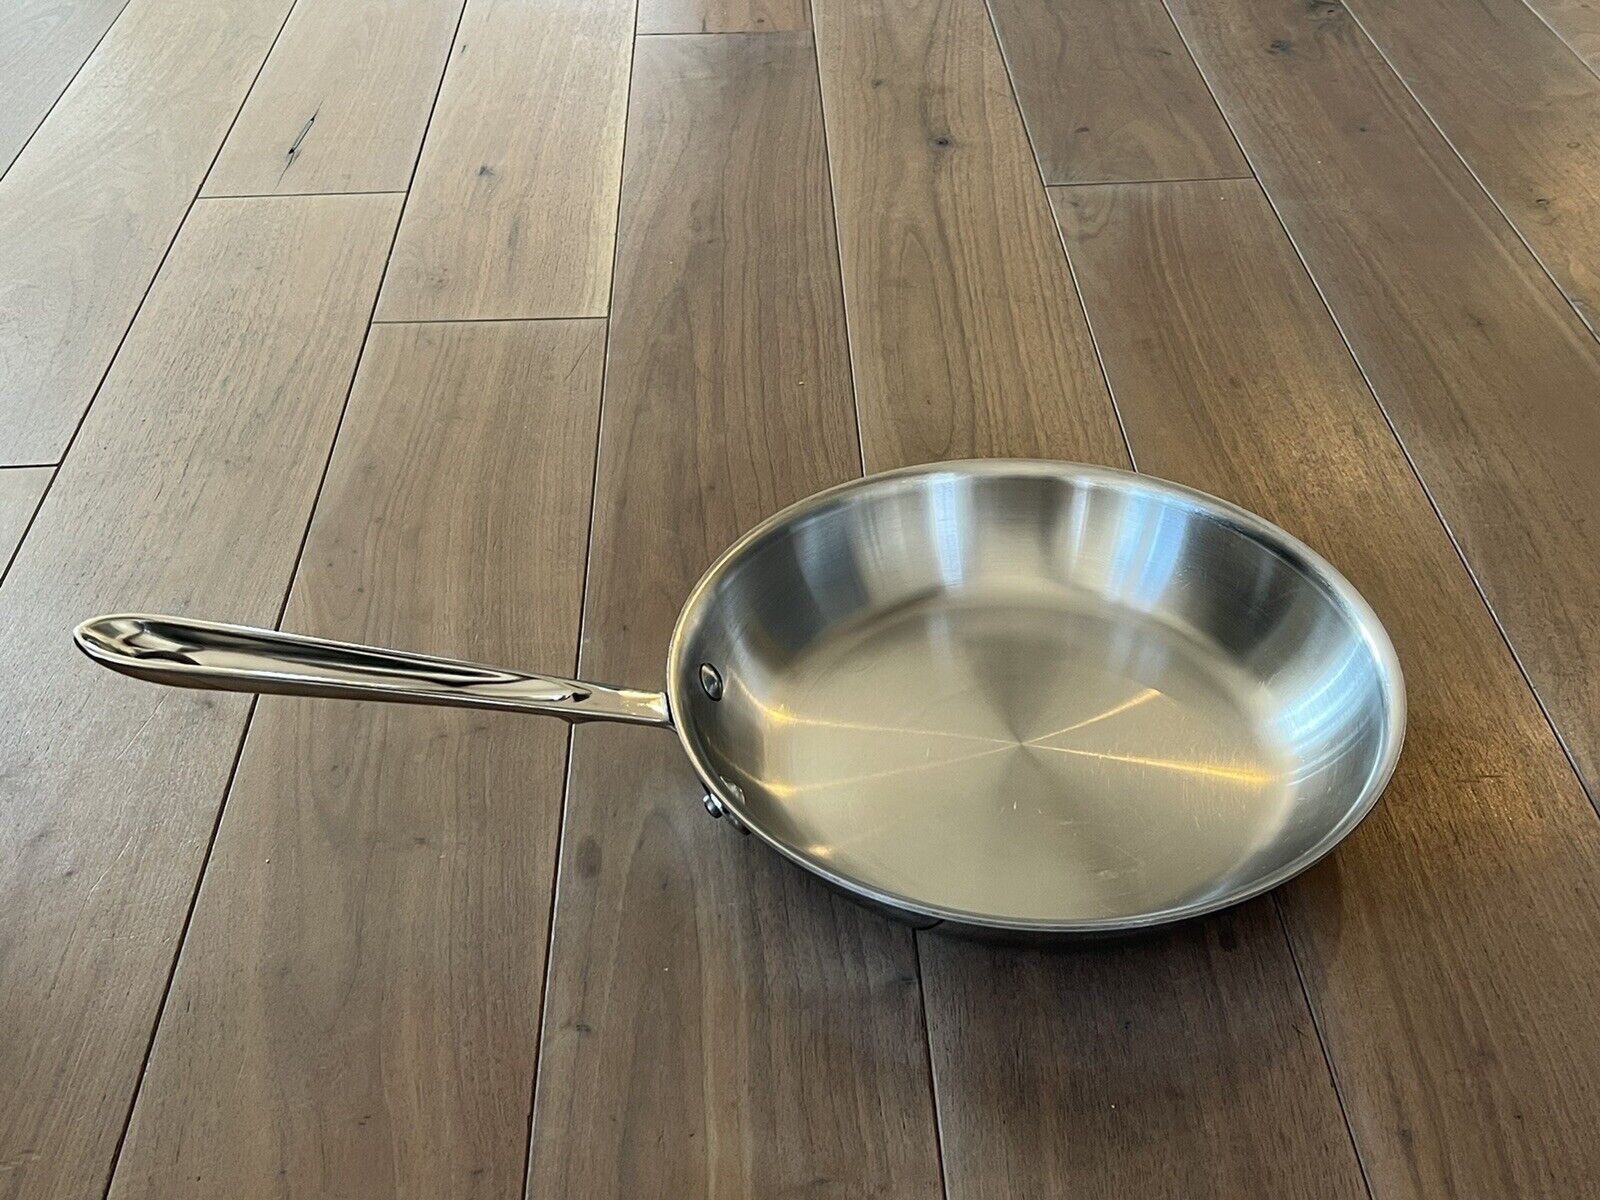 ALL CLAD D5 10” Stainless Steel￼ Frying Pan￼